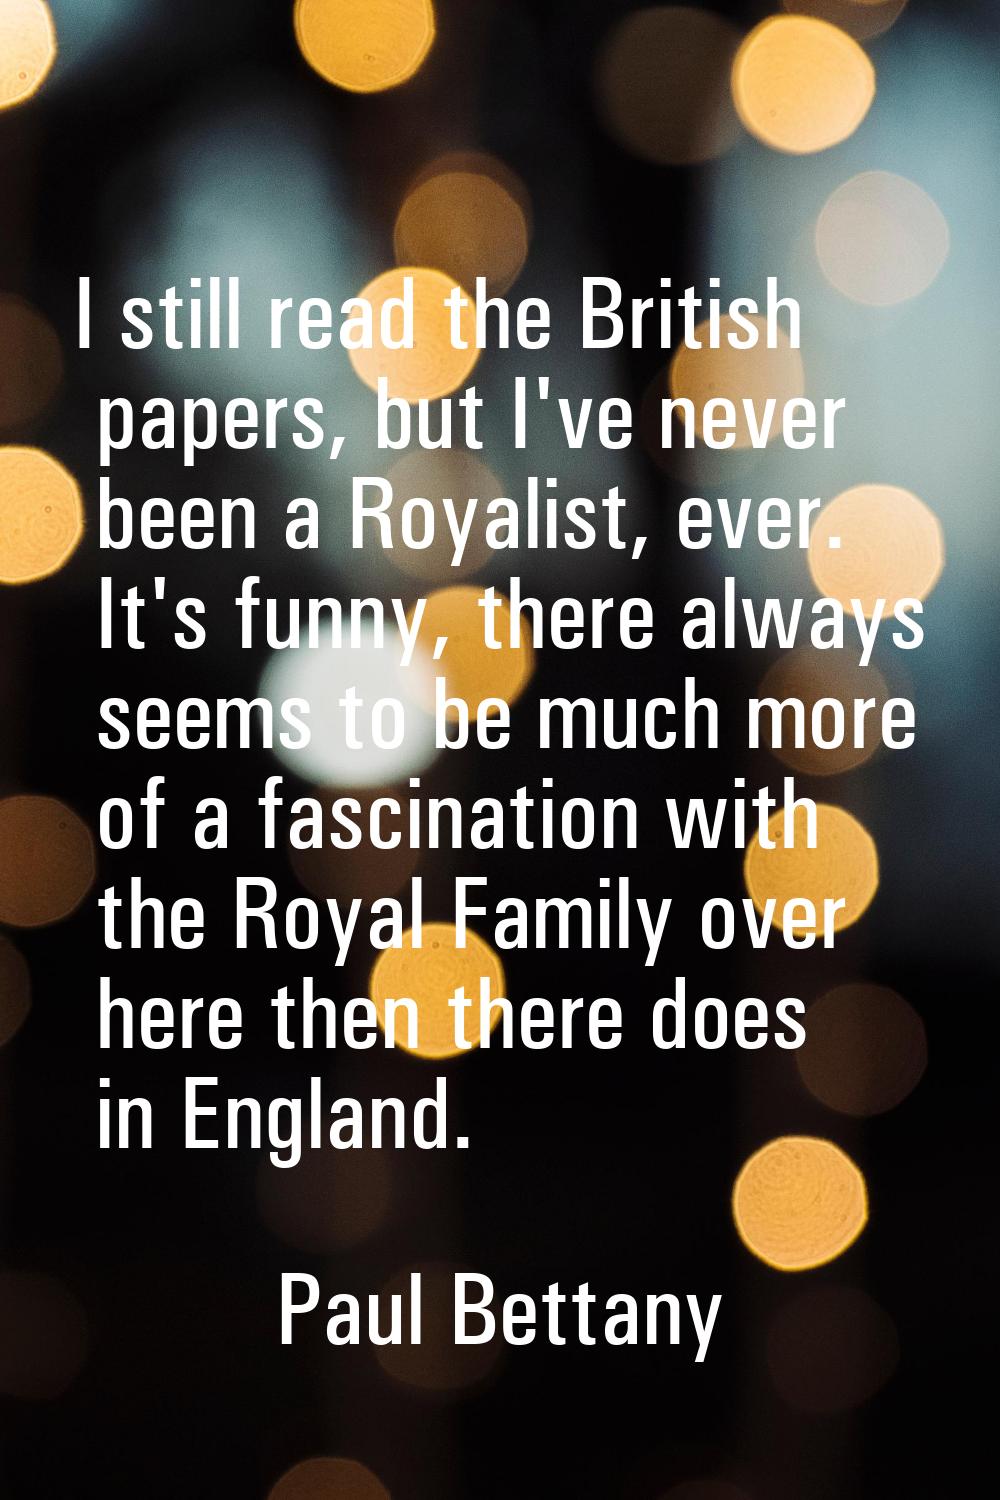 I still read the British papers, but I've never been a Royalist, ever. It's funny, there always see